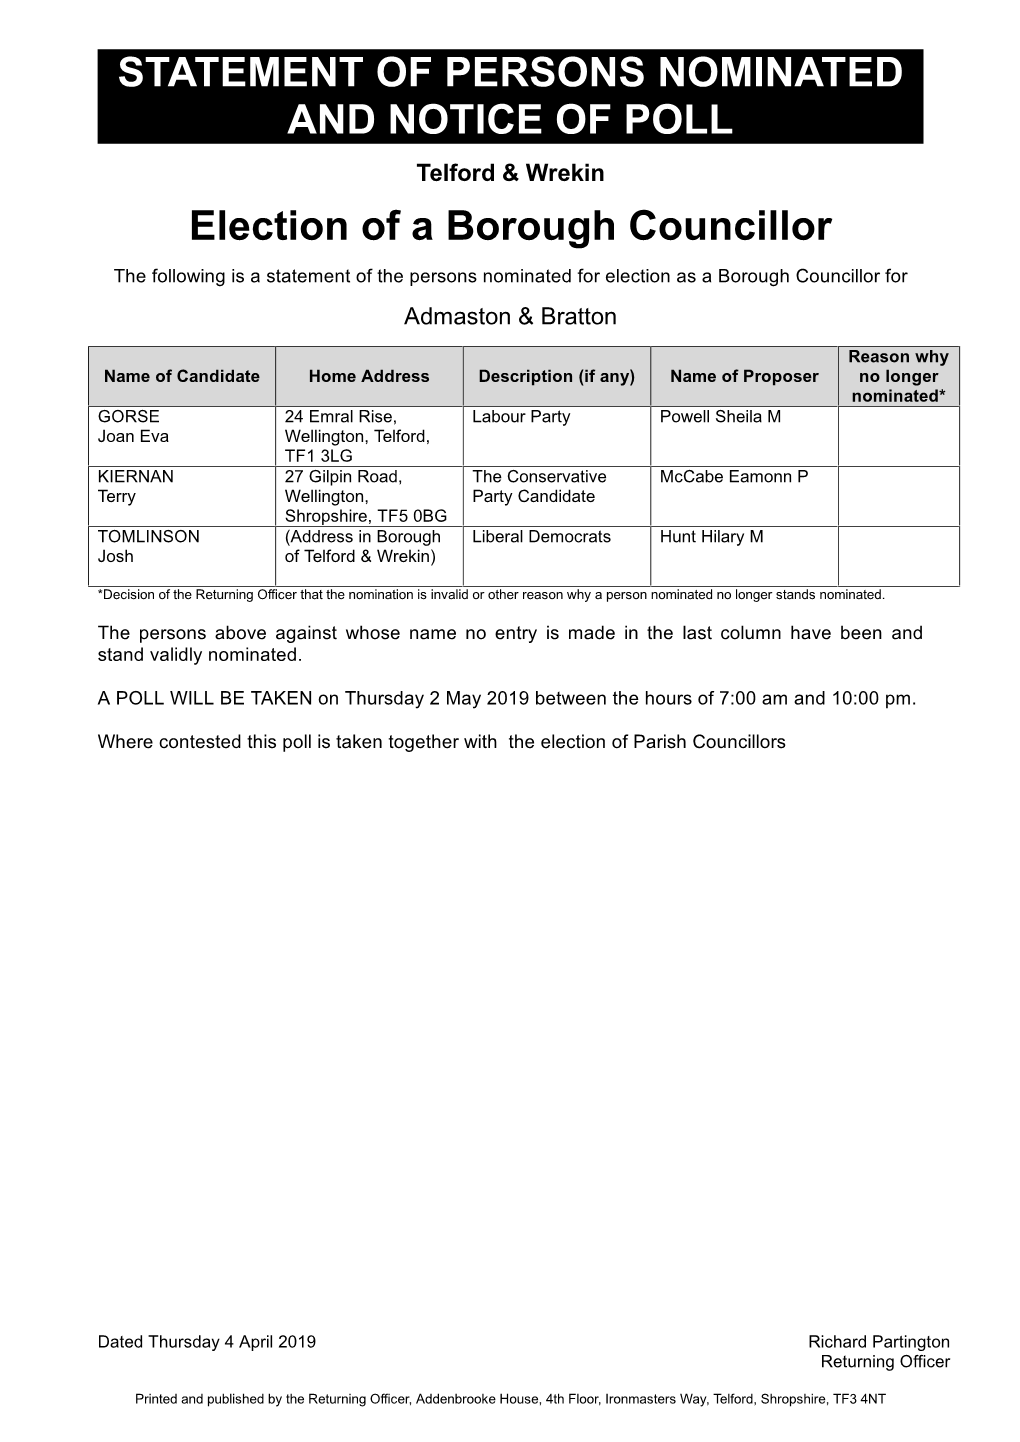 STATEMENT of PERSONS NOMINATED and NOTICE of POLL Telford & Wrekin Election of a Borough Councillor